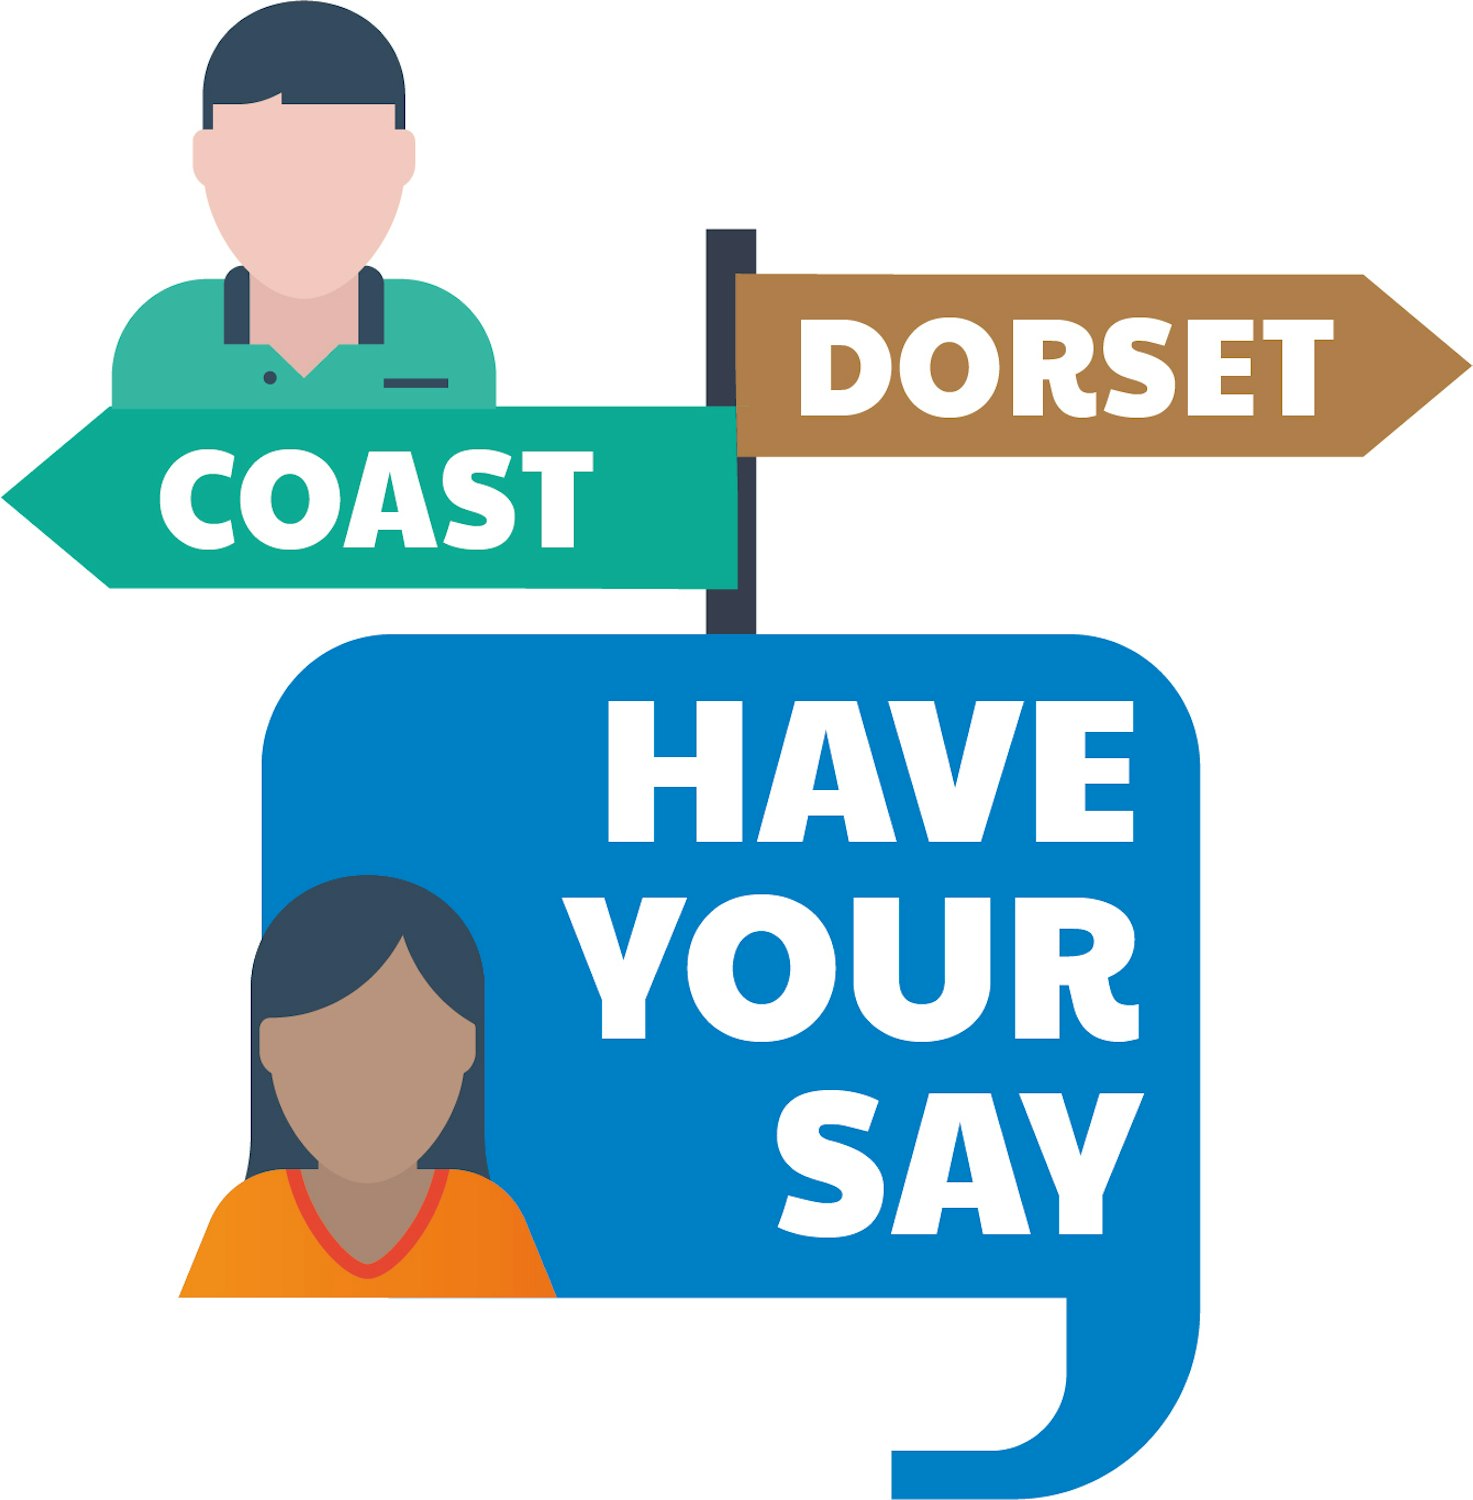 Dorset Coast Have Your Say